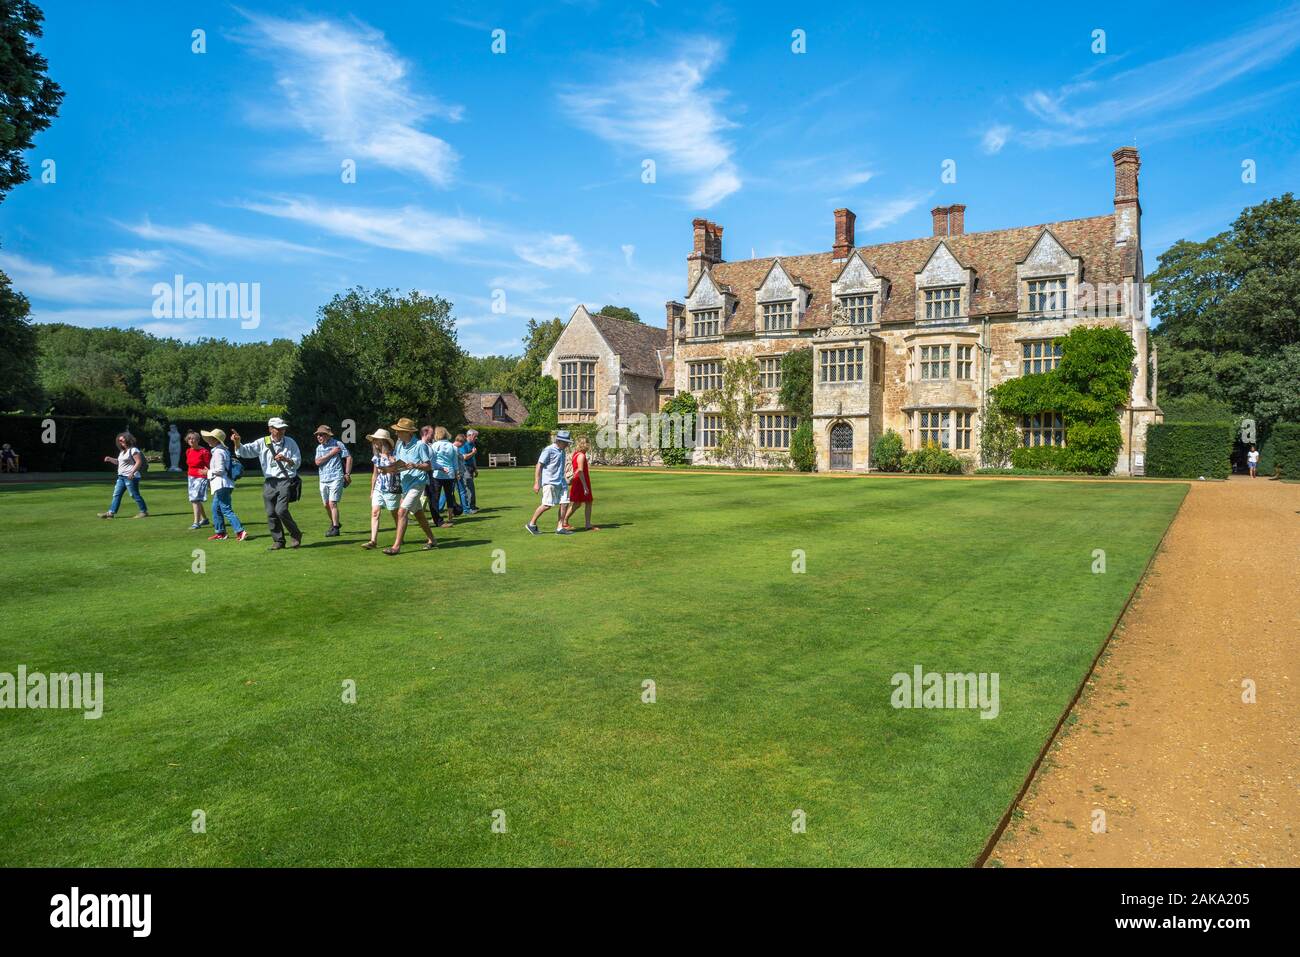 Anglesey Abbey, view of the lawn and south front of Anglesey Abbey, a 17th century country house in the village of Lode, Cambridgeshire, England, UK. Stock Photo